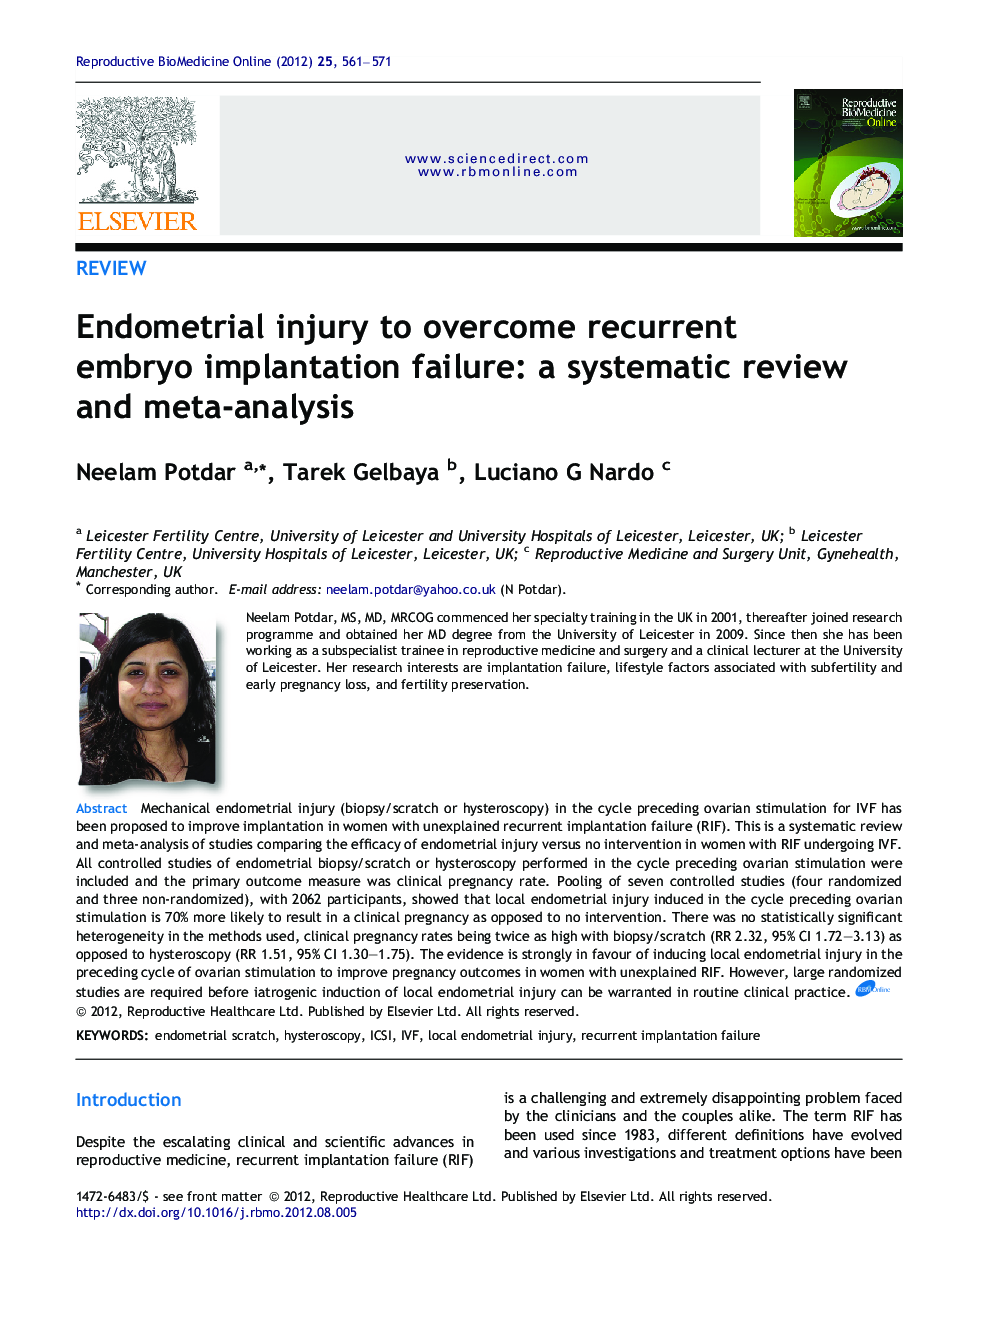 Endometrial injury to overcome recurrent embryo implantation failure: a systematic review and meta-analysis 